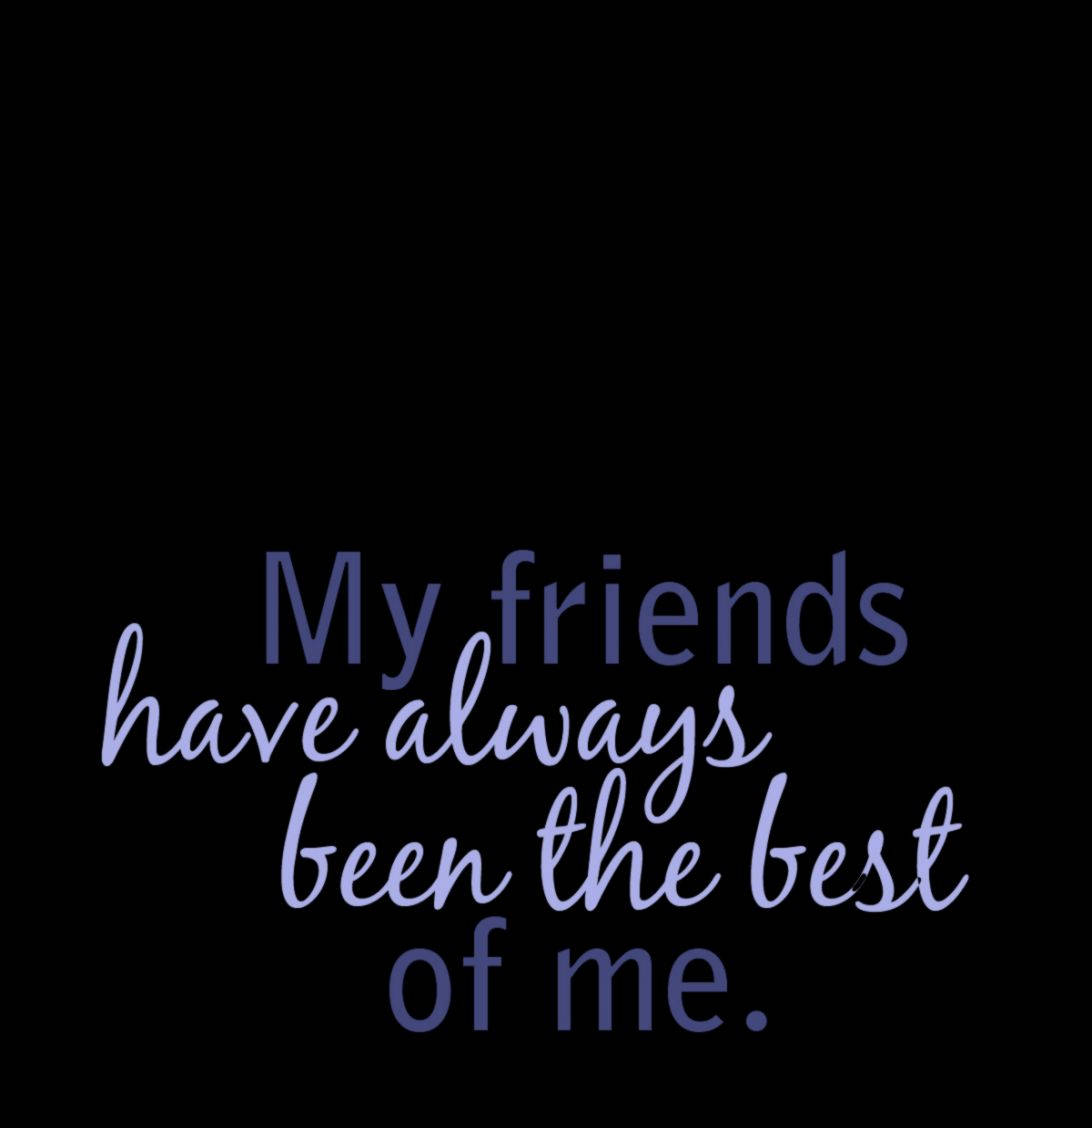 Download Best Friend Quotes On Black Background Wallpaper 